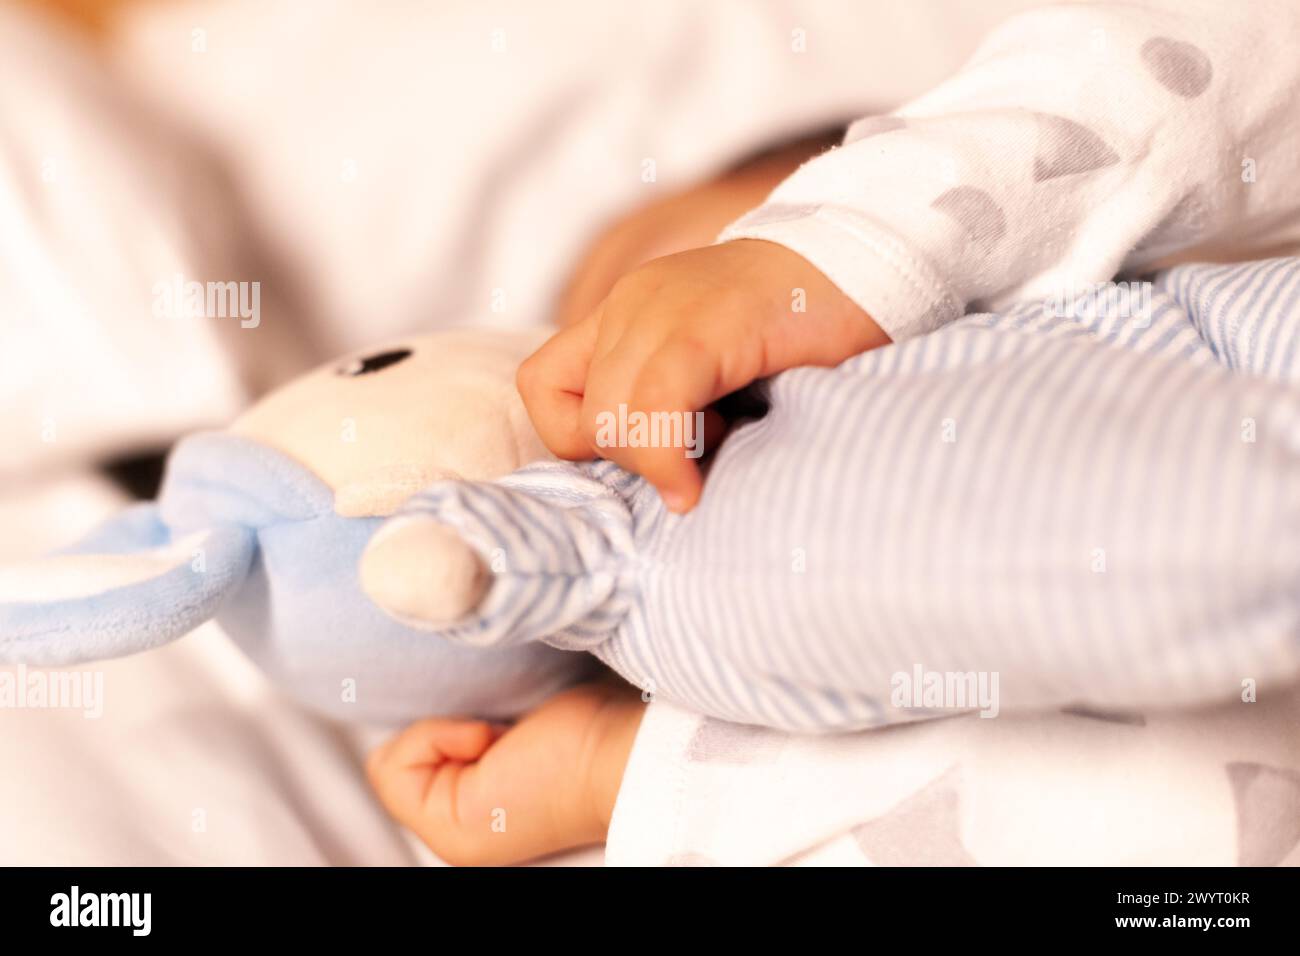 baby's hands holding doll while sleeping Stock Photo